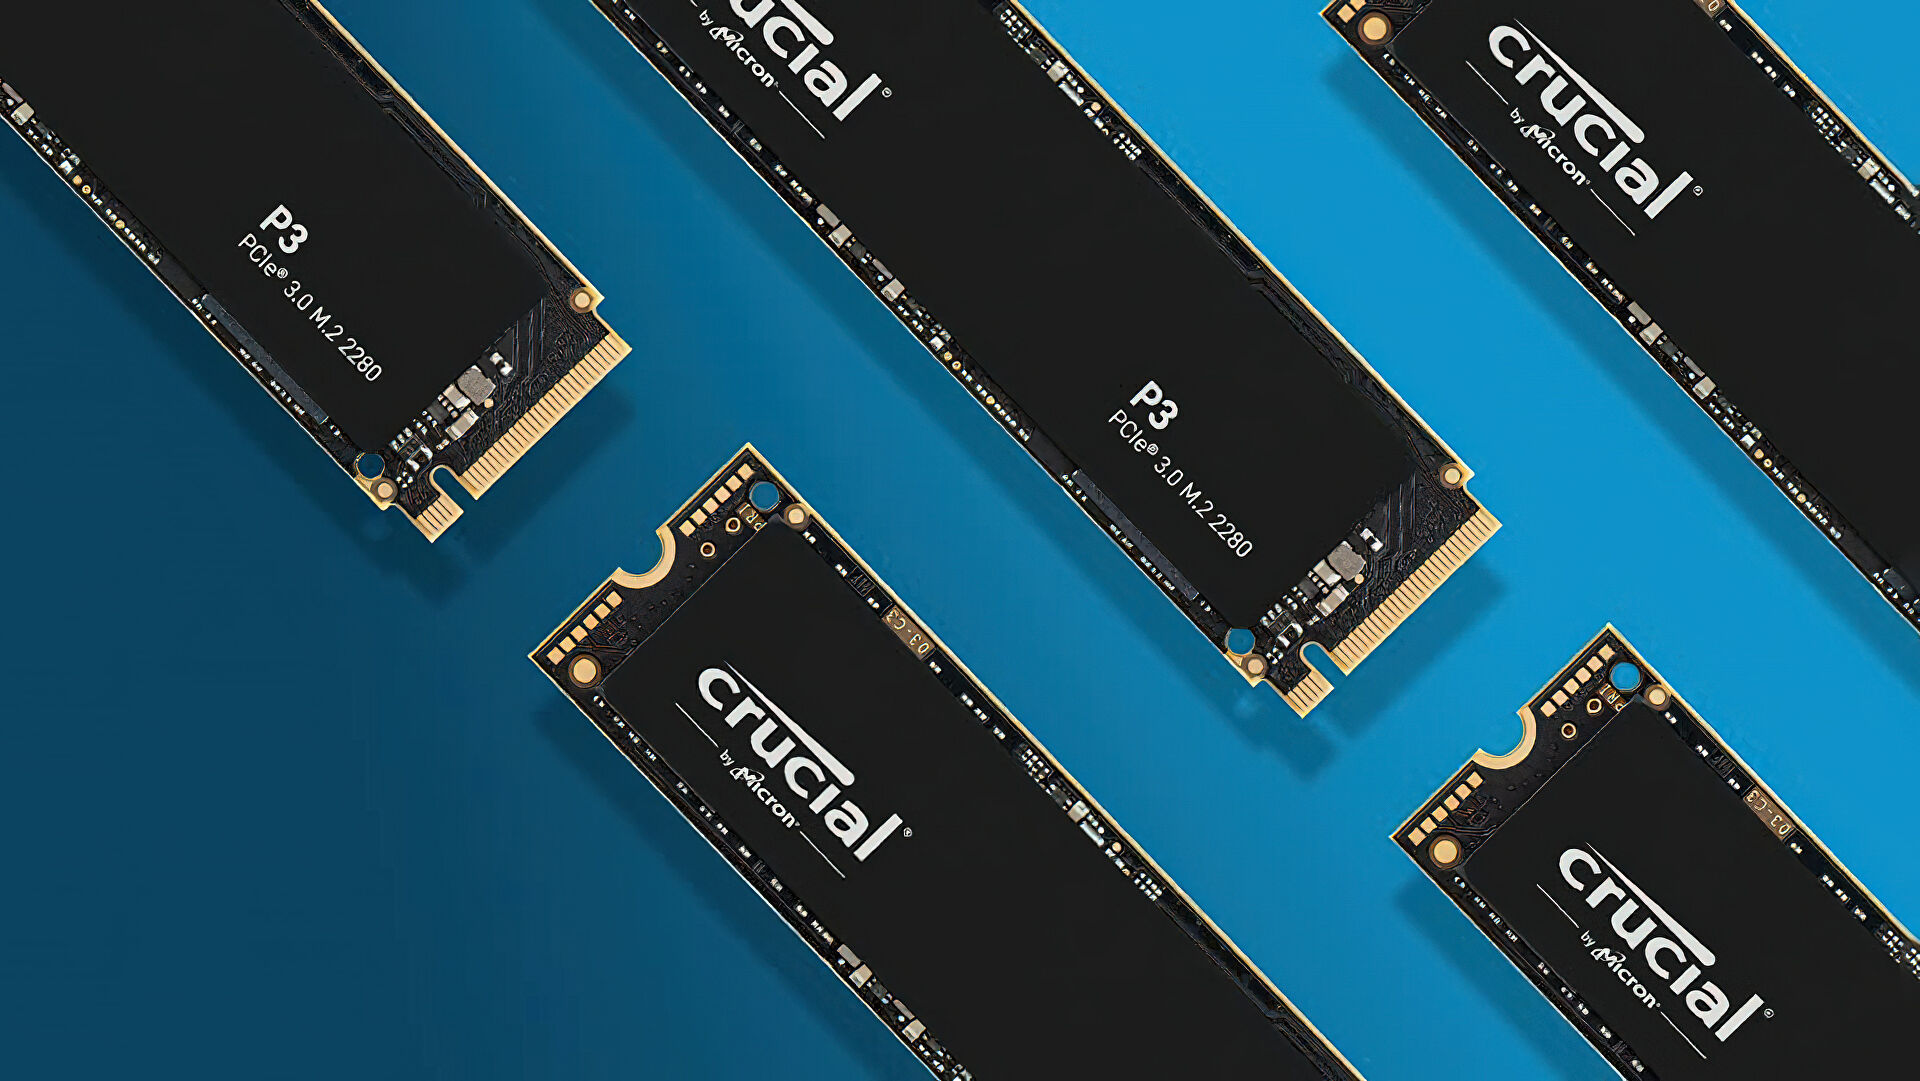 Crucial’s P3 NVMe SSD is down to £105 for a 2TB unit